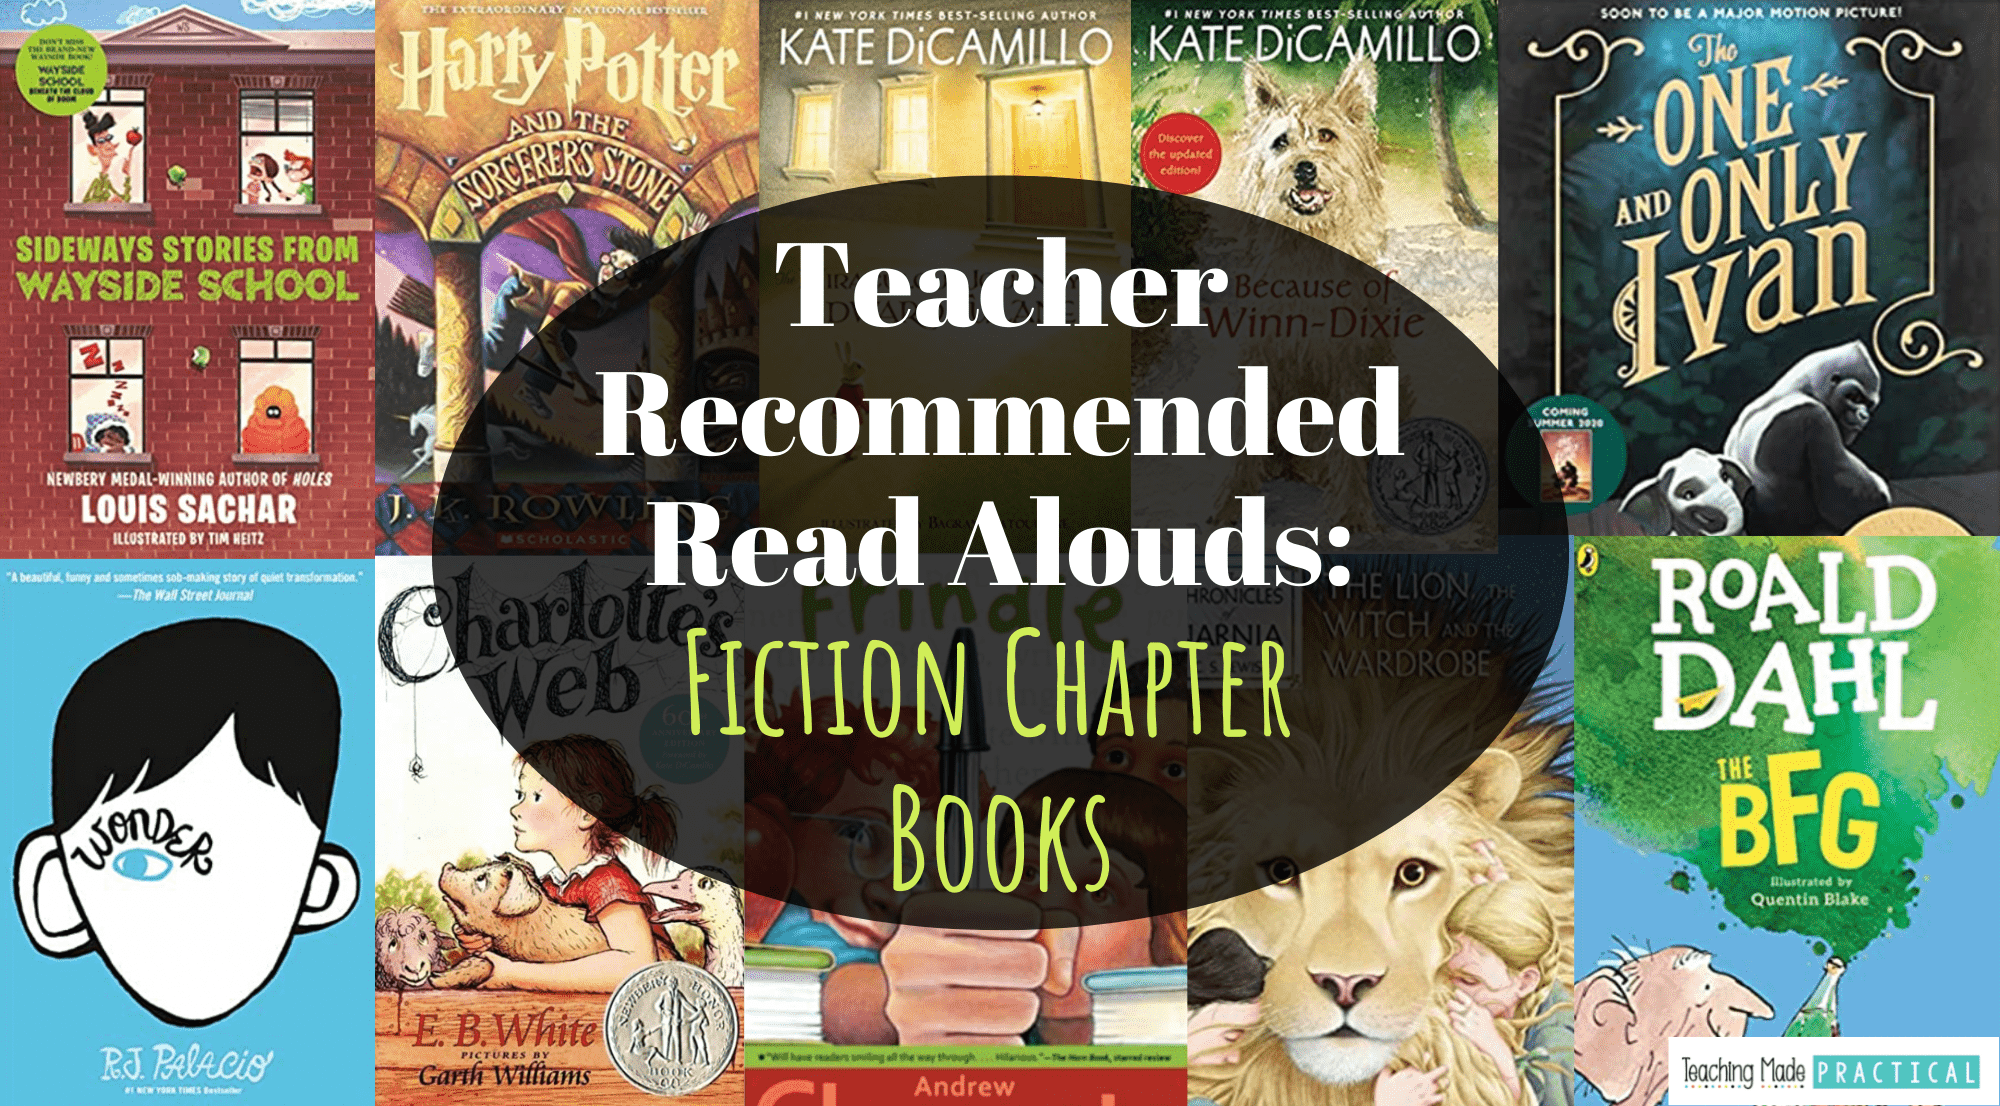 the best fiction chapter book read alouds for 3rd, 4th, and 5th grade teachers and classrooms